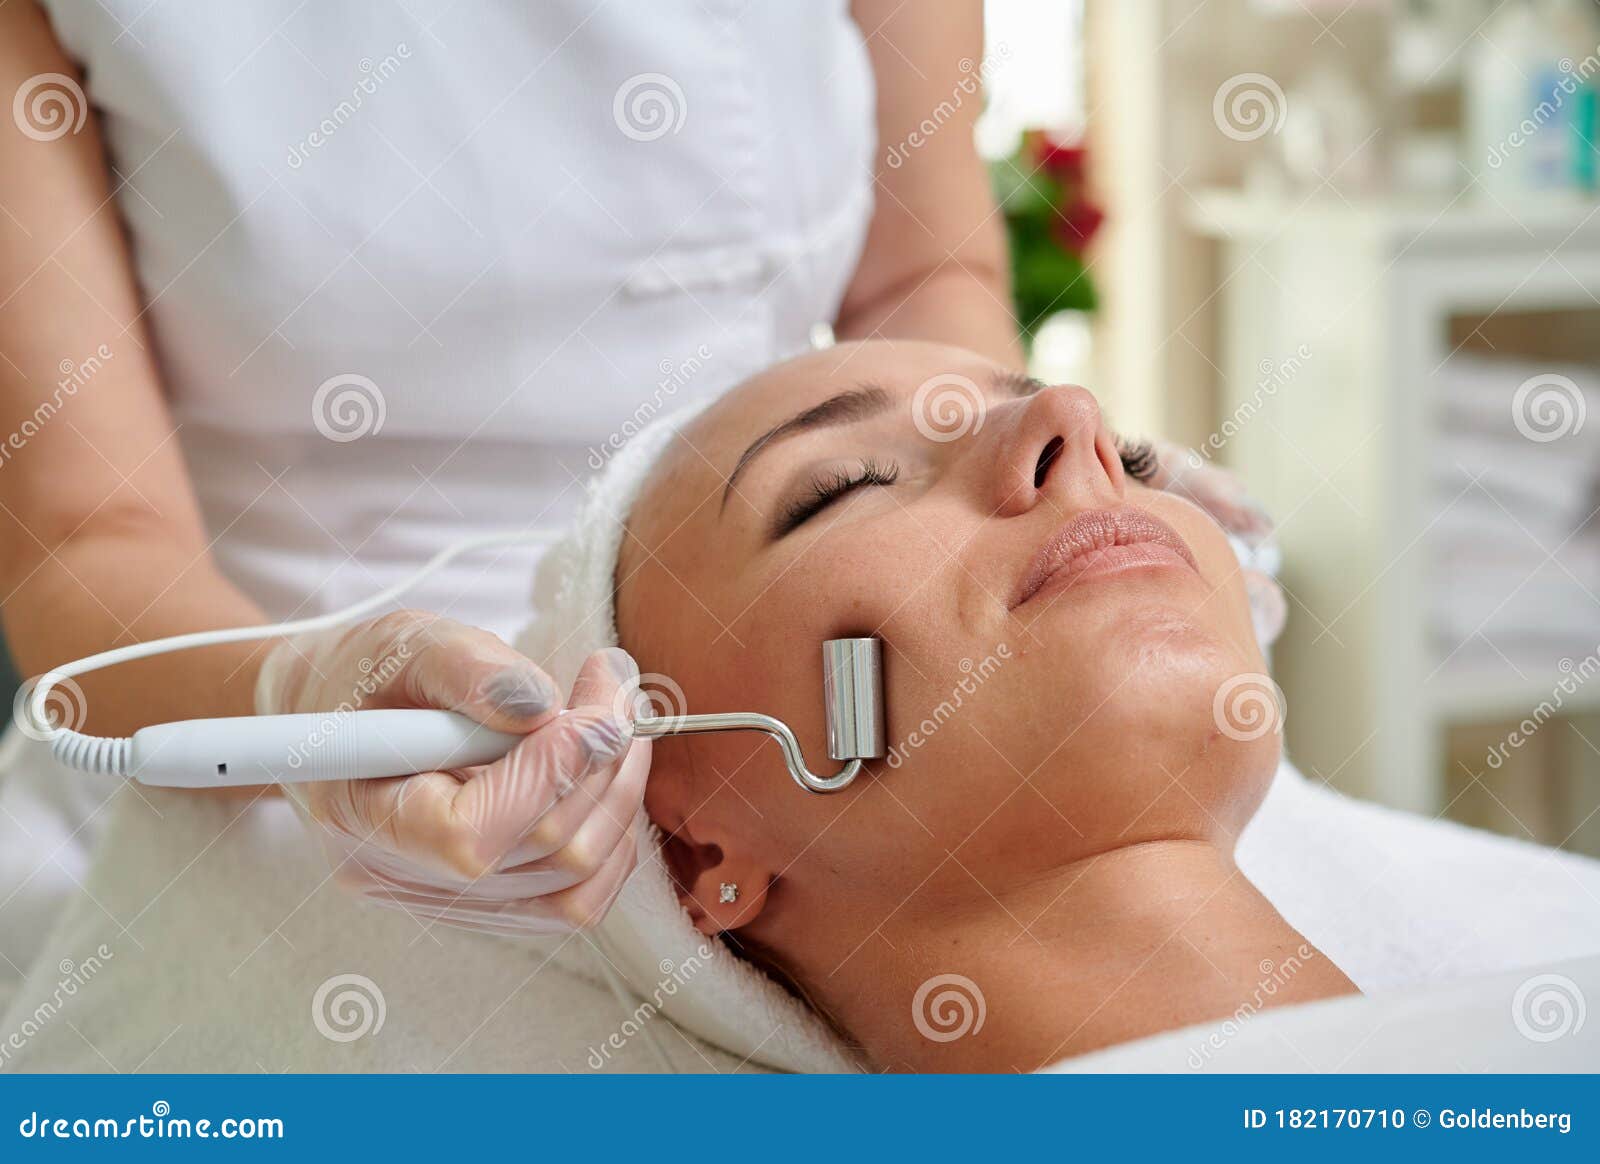 female receiving microcurrent therapy in spa cosmetologist professional services